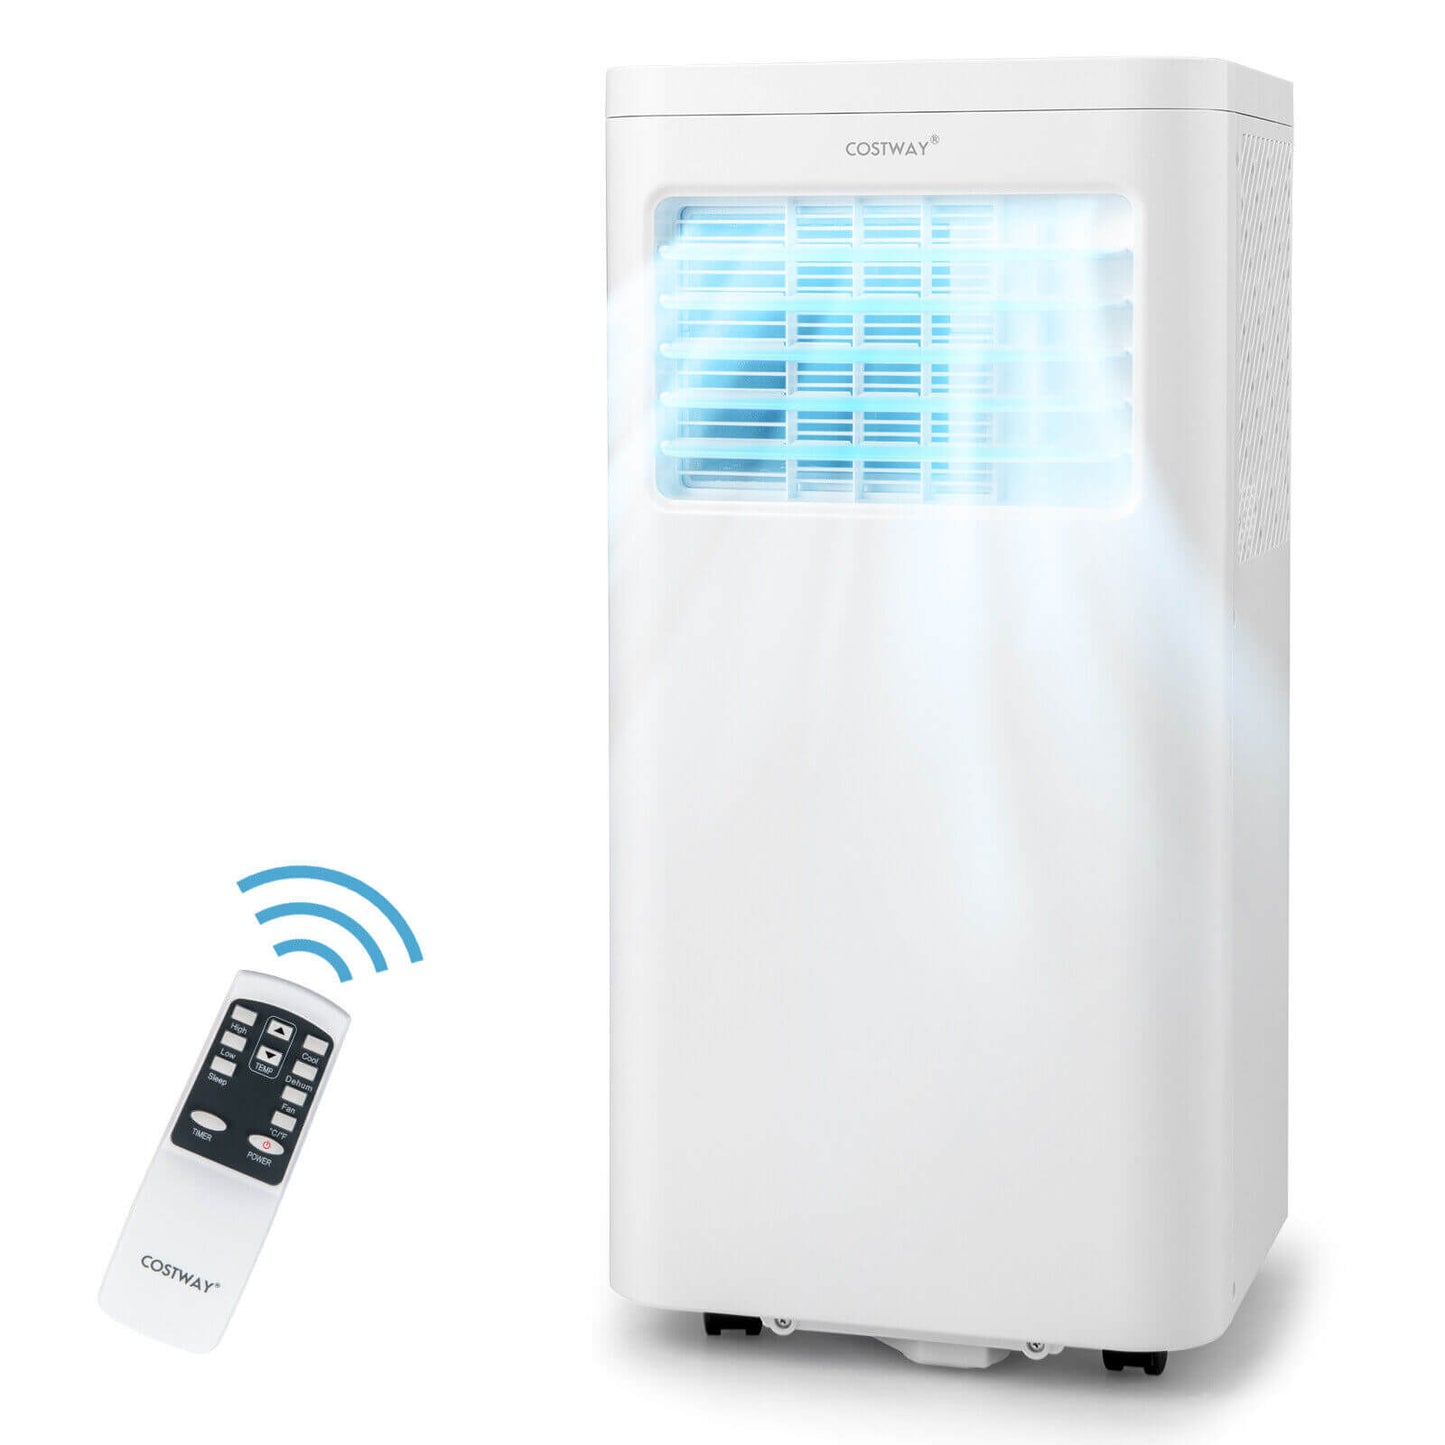 3-in-1 Portable Air Conditioner with Fan Dehumidifier and Quiet AC, White